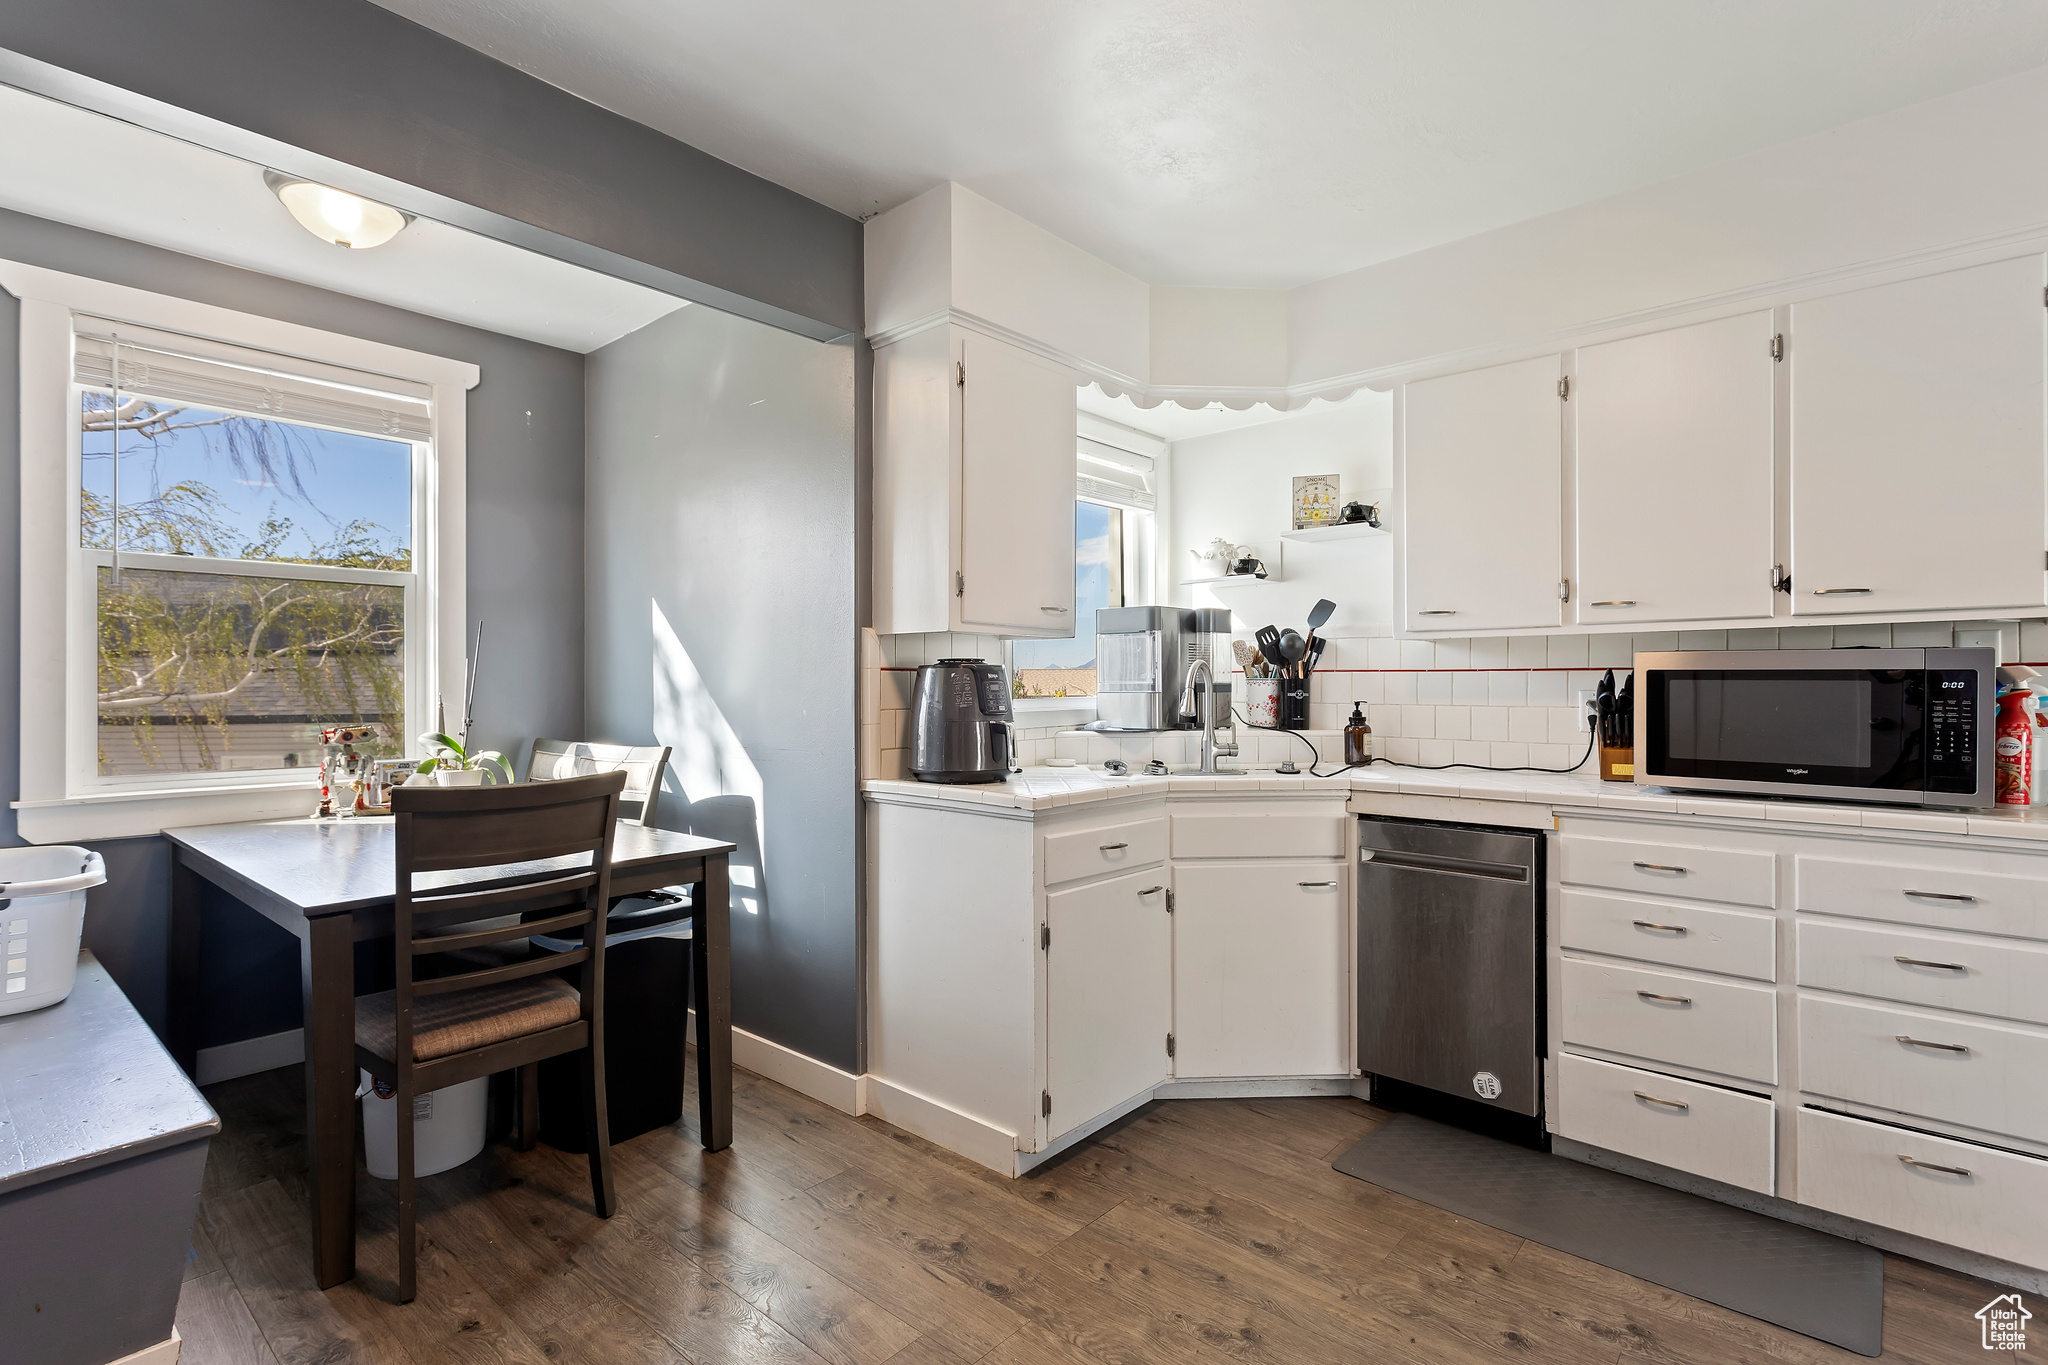 Kitchen featuring appliances with stainless steel finishes, white cabinets, tasteful backsplash, dark hardwood / wood-style flooring, and a healthy amount of sunlight